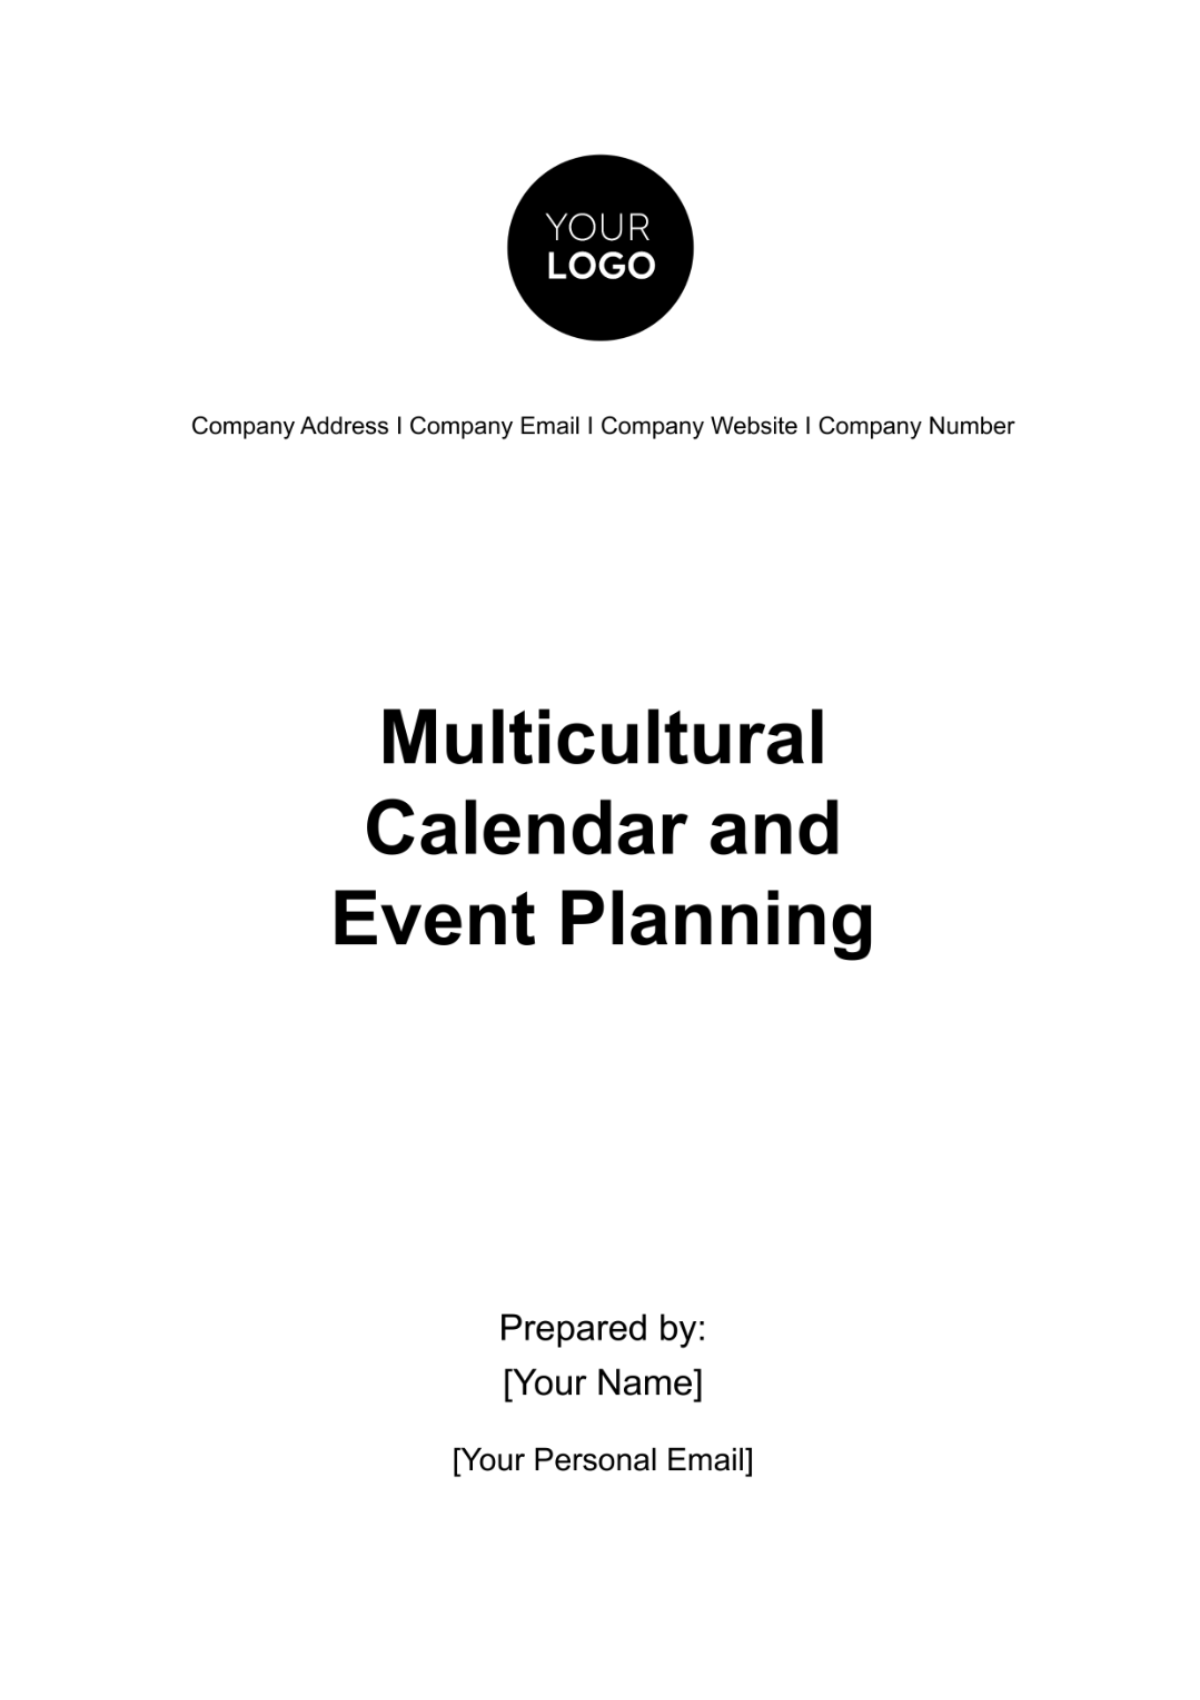 Free Multicultural Calendar and Event Planning HR Template